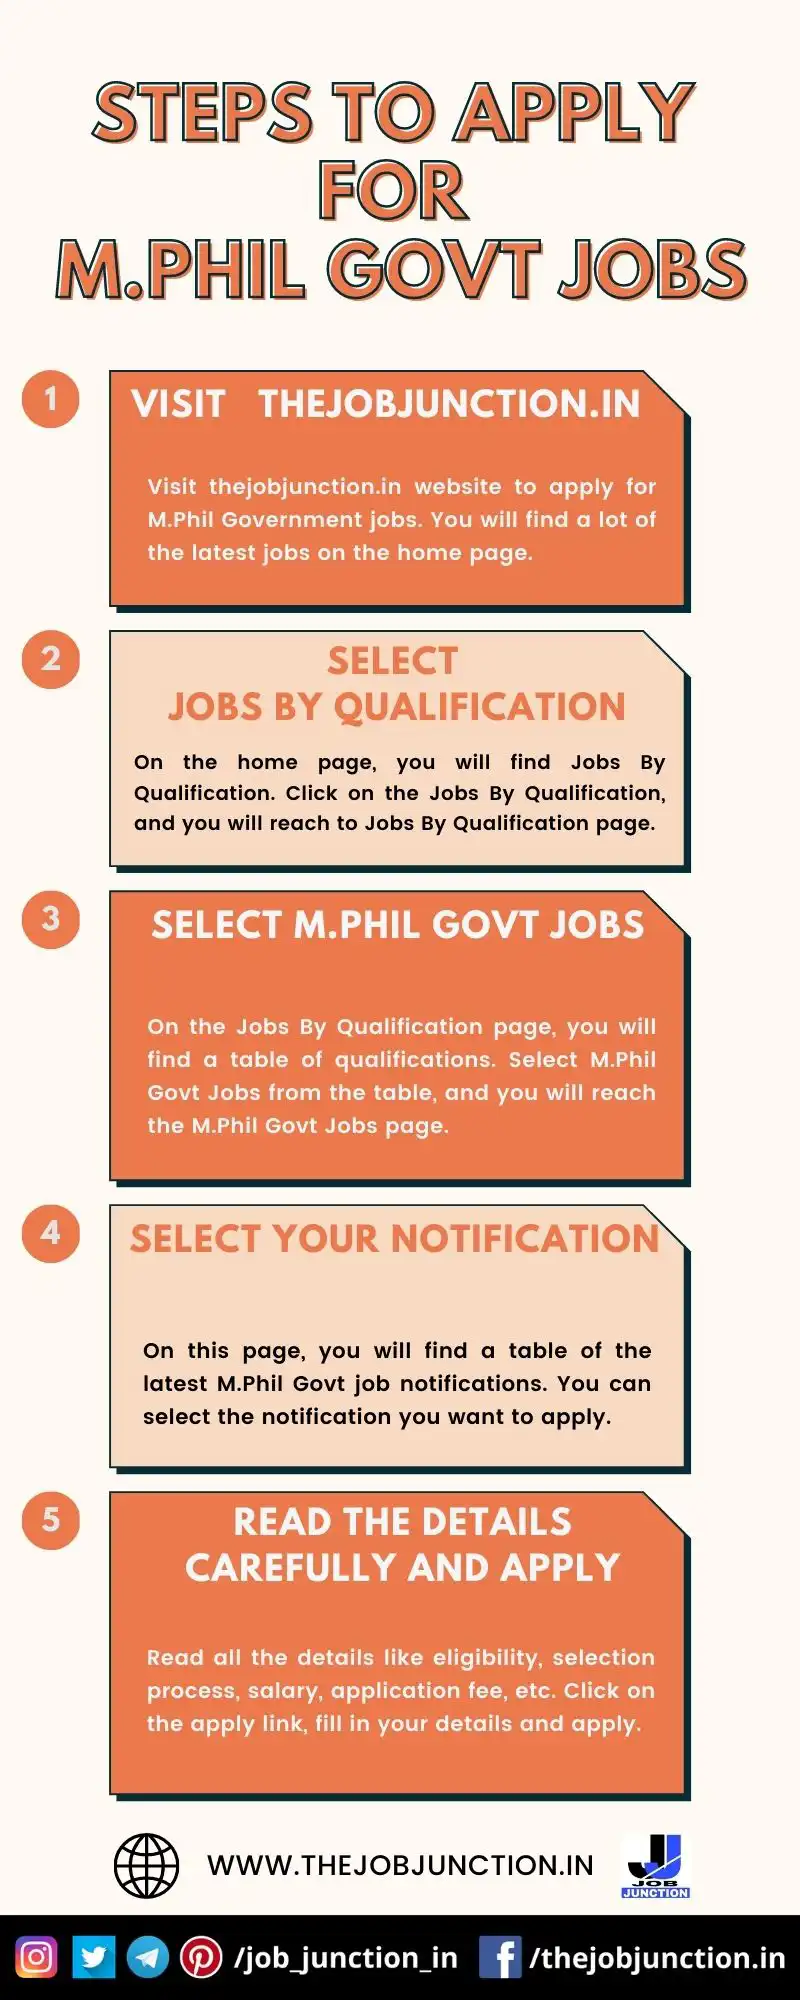 STEPS TO APPLY FOR M.PHIL GOVT JOBS